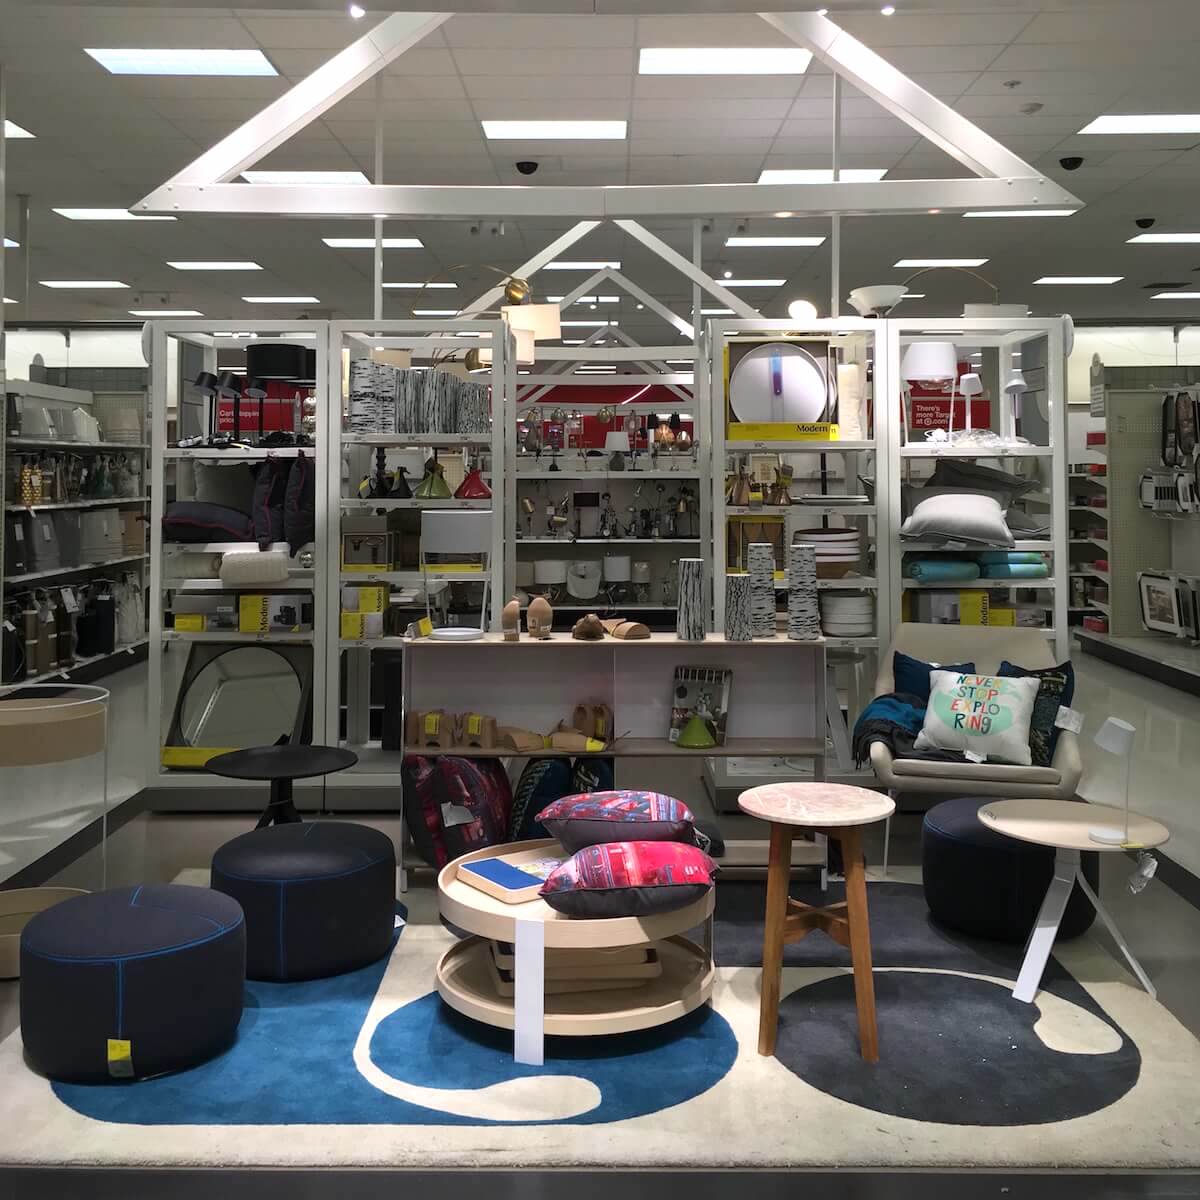 dwell magazine for target in-store display